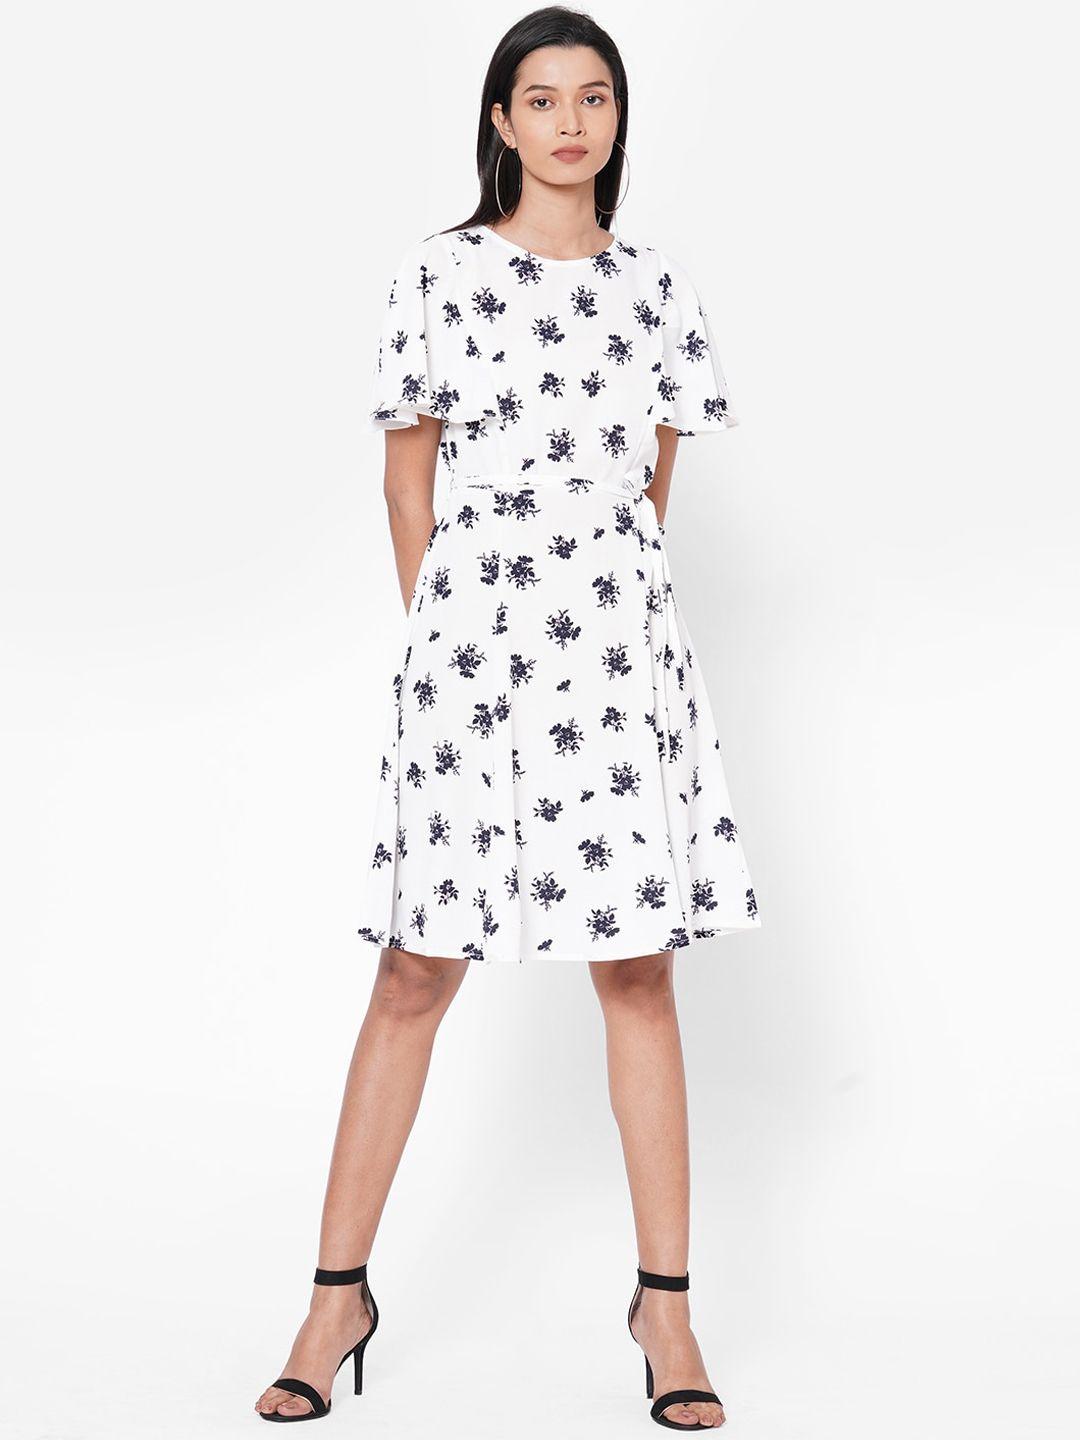 109f women white & navy blue floral printed fit and flare dress